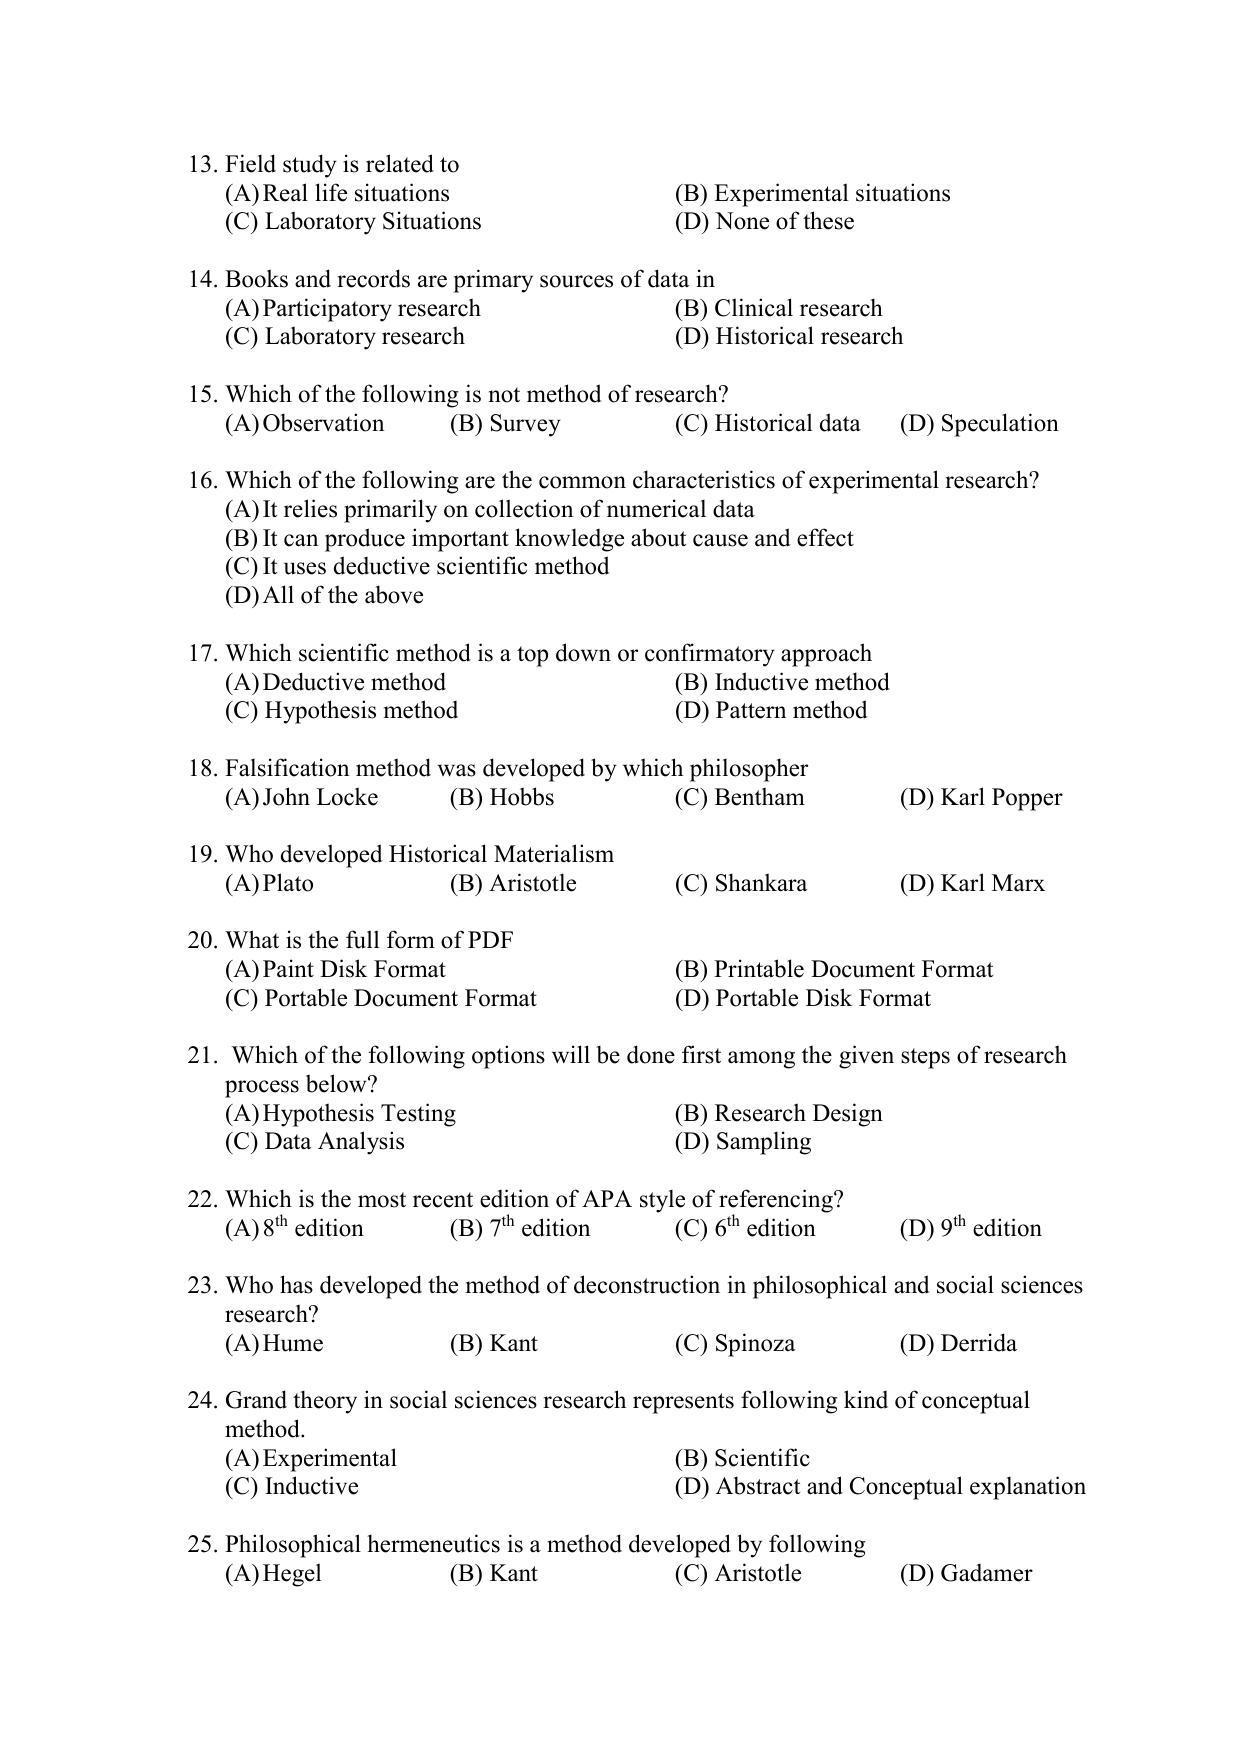 PU MPET Ancient Indian History & Archeology 2022 Question Papers - Page 23